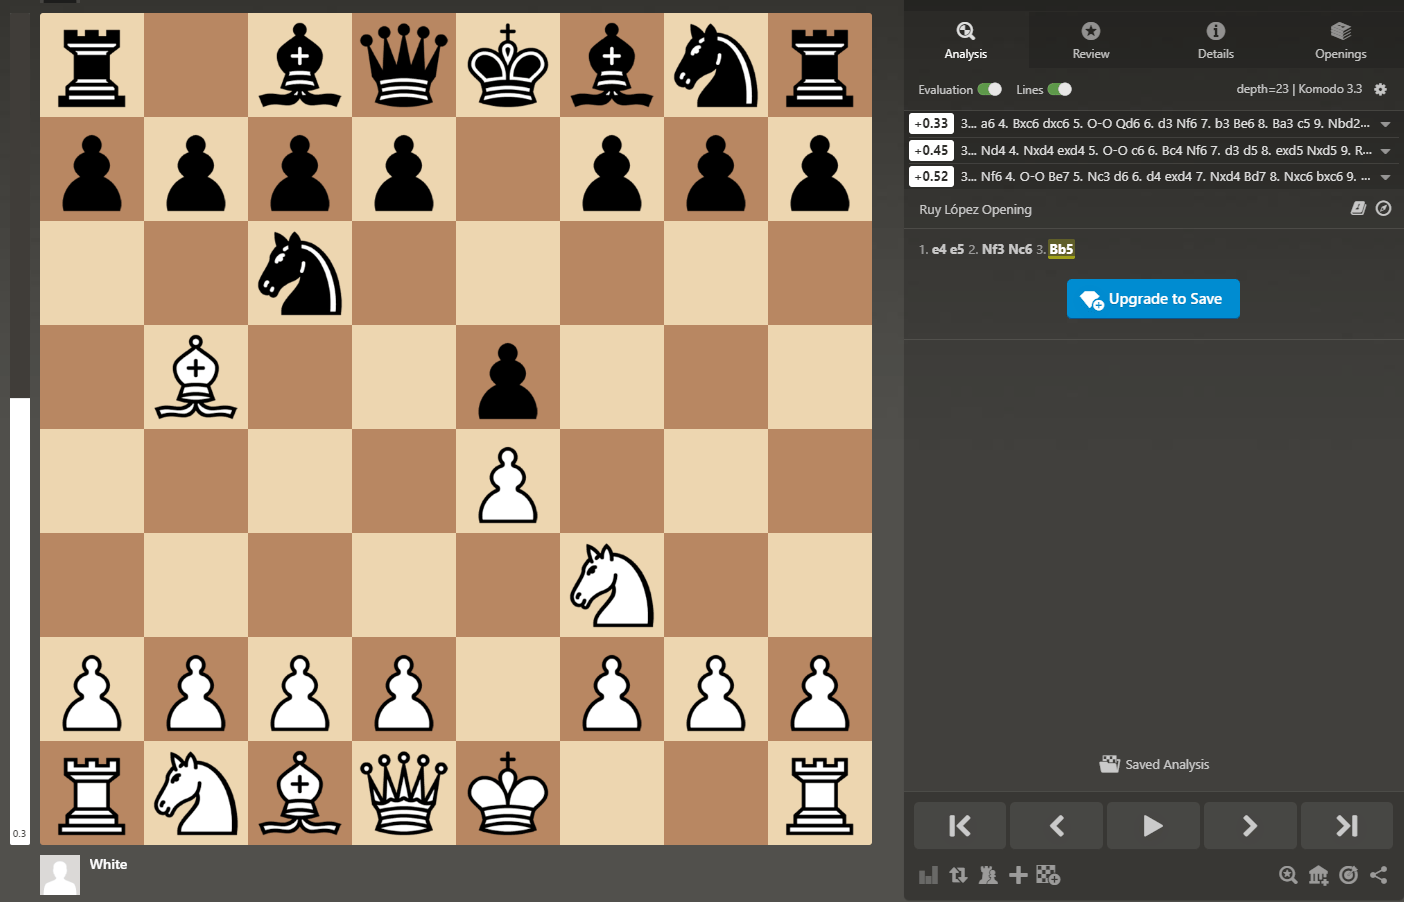 Is there a website where I can move chess pieces however I want, basically  recreate a new type of game (I need this for a video idea)? - Quora